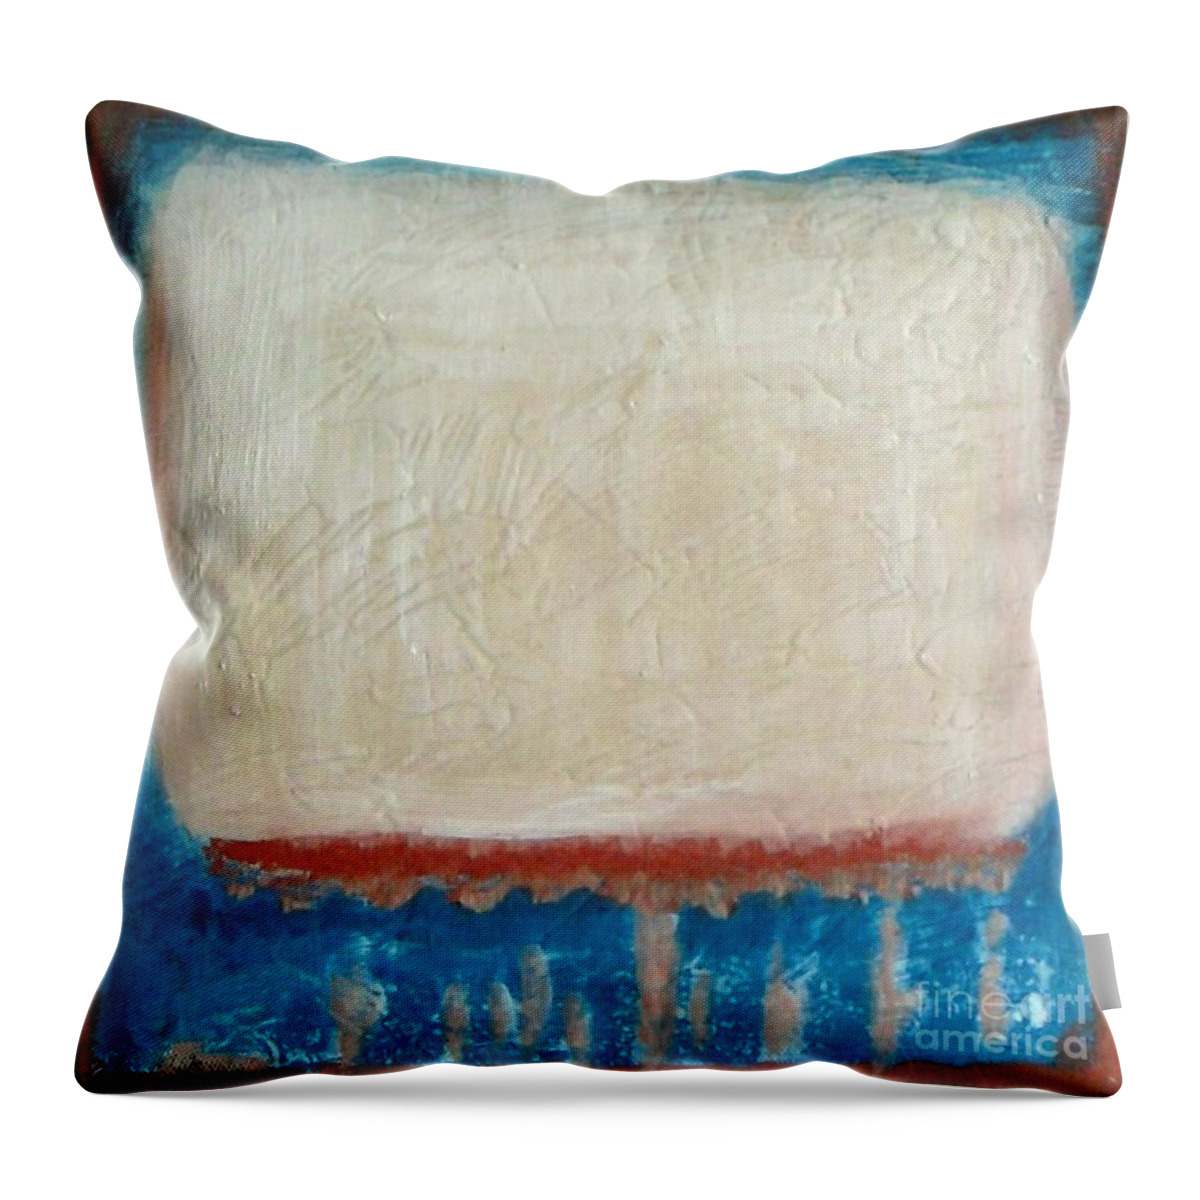 Abstract Throw Pillow featuring the painting New Day by Vesna Antic